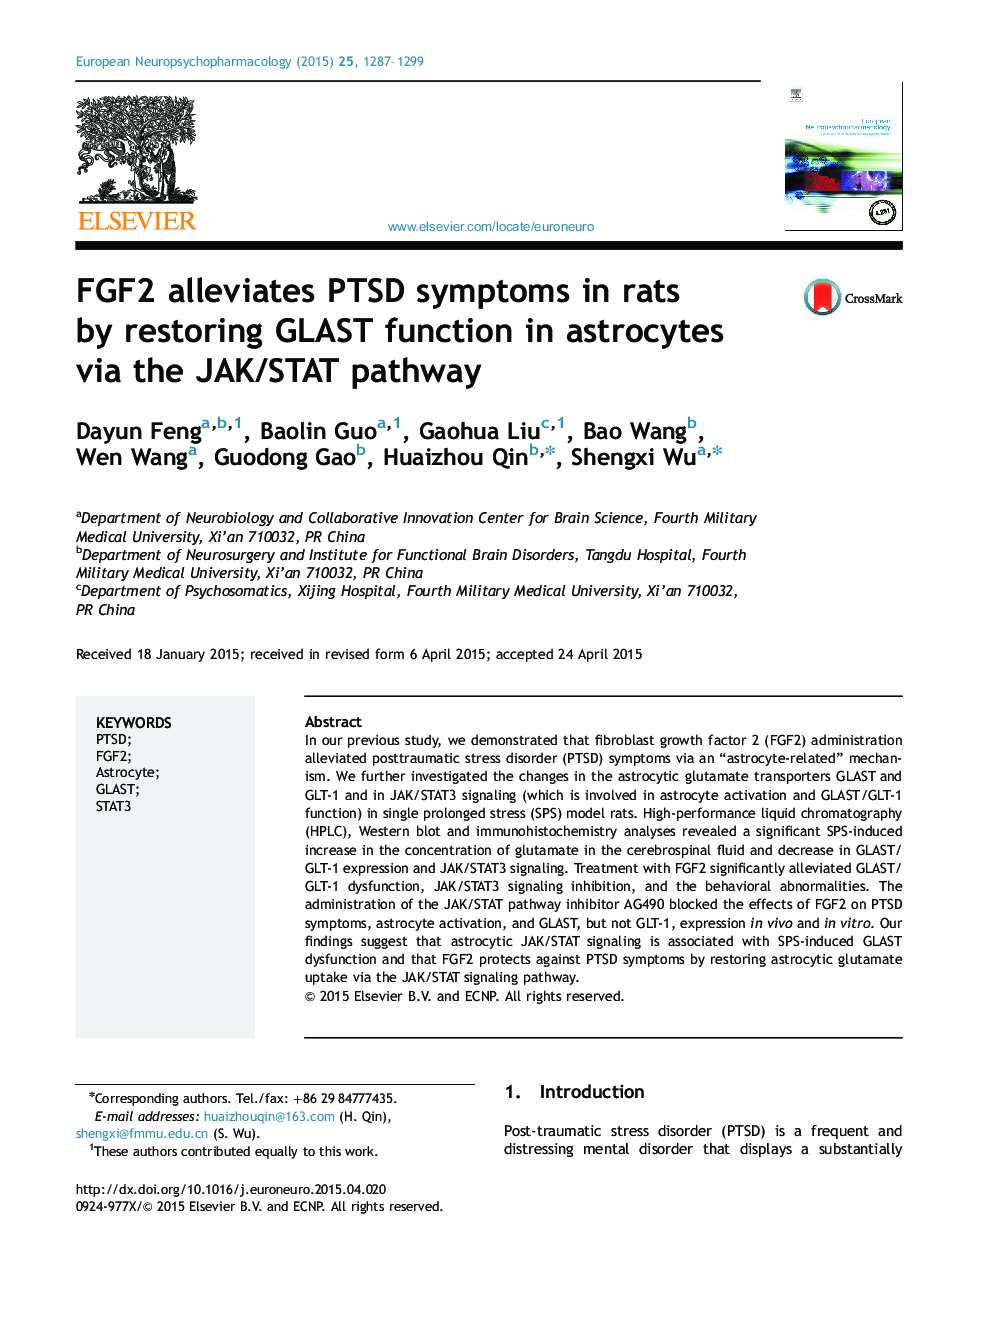 FGF2 alleviates PTSD symptoms in rats by restoring GLAST function in astrocytes via the JAK/STAT pathway